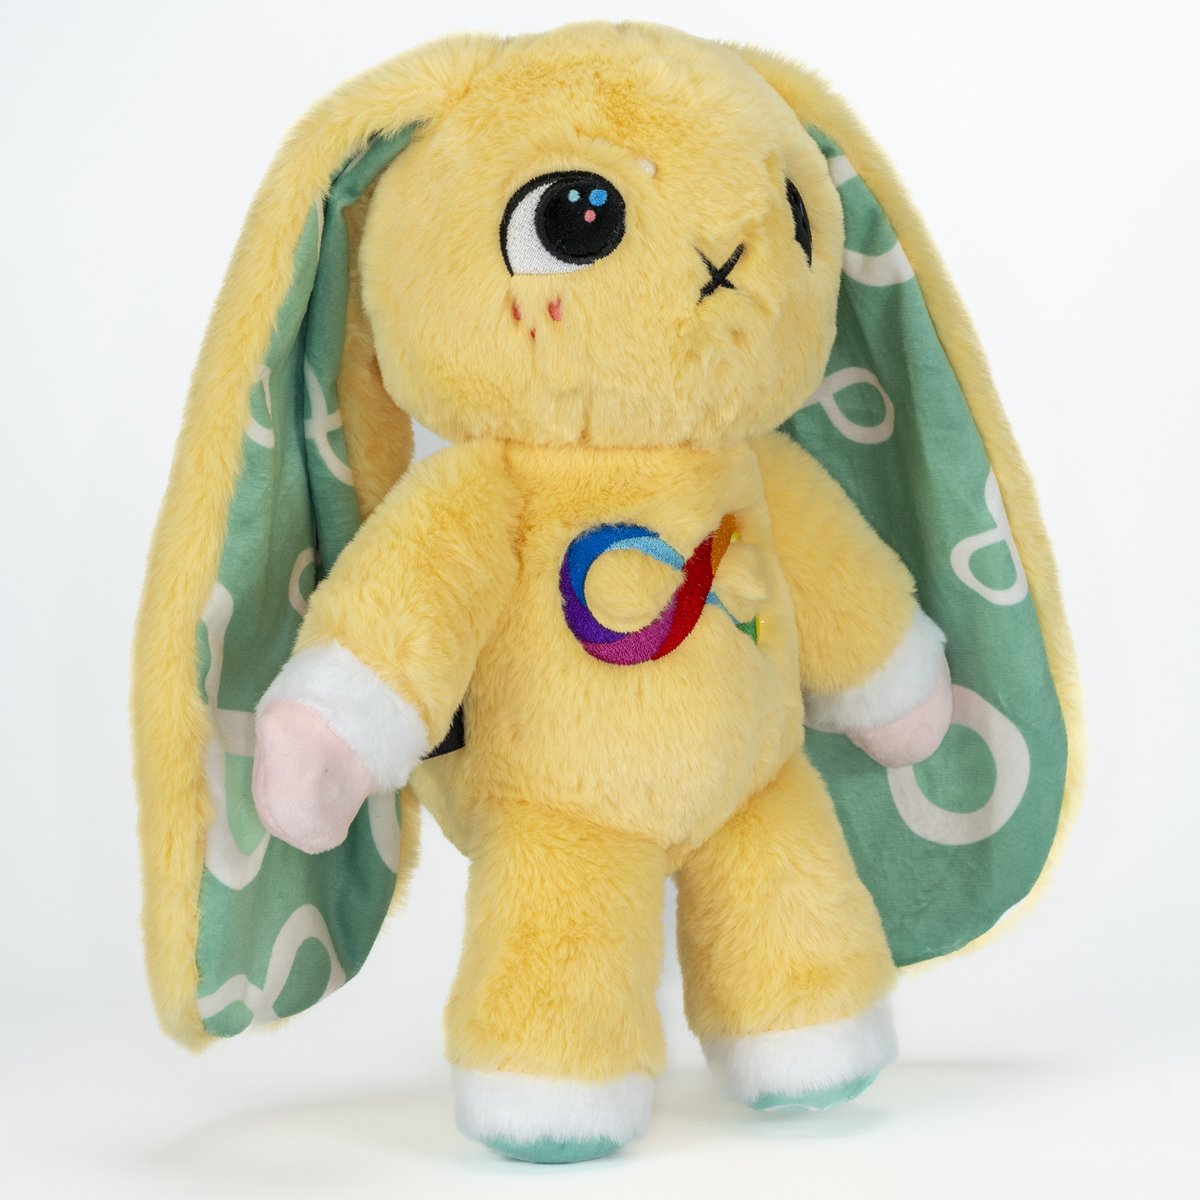 We are honoured by the positive response our autism rabbit has received! #autismtwt #AutismAwareness plushiedreadfuls.com/products/autis…